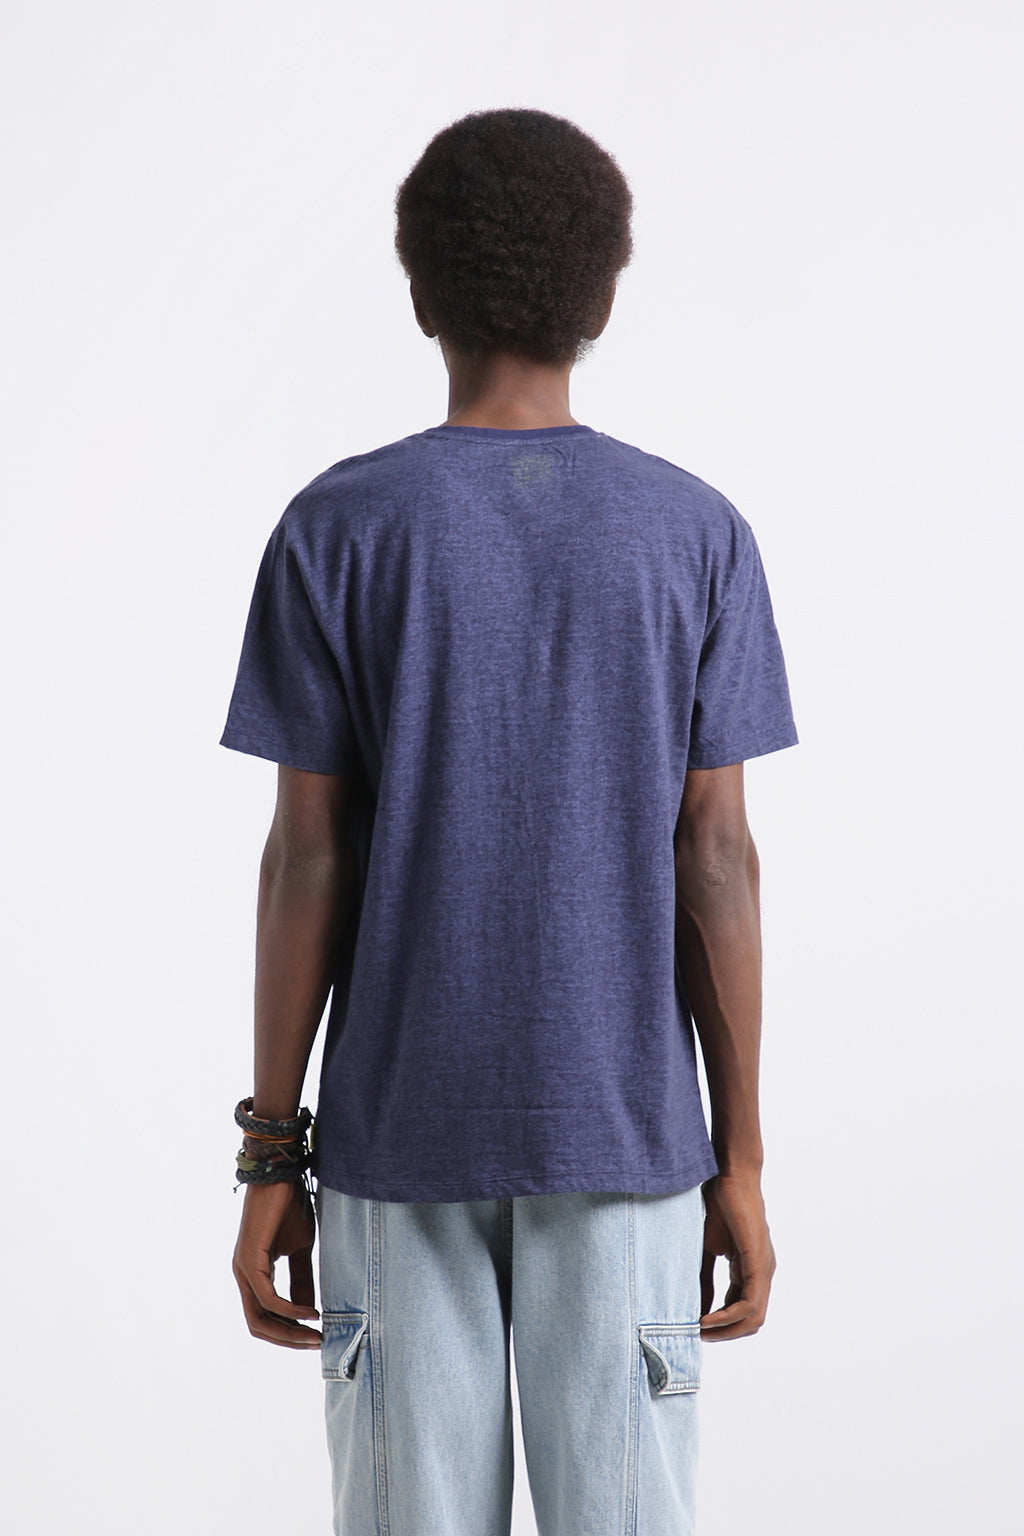 HENLEY NECK SOLID T-SHIRT